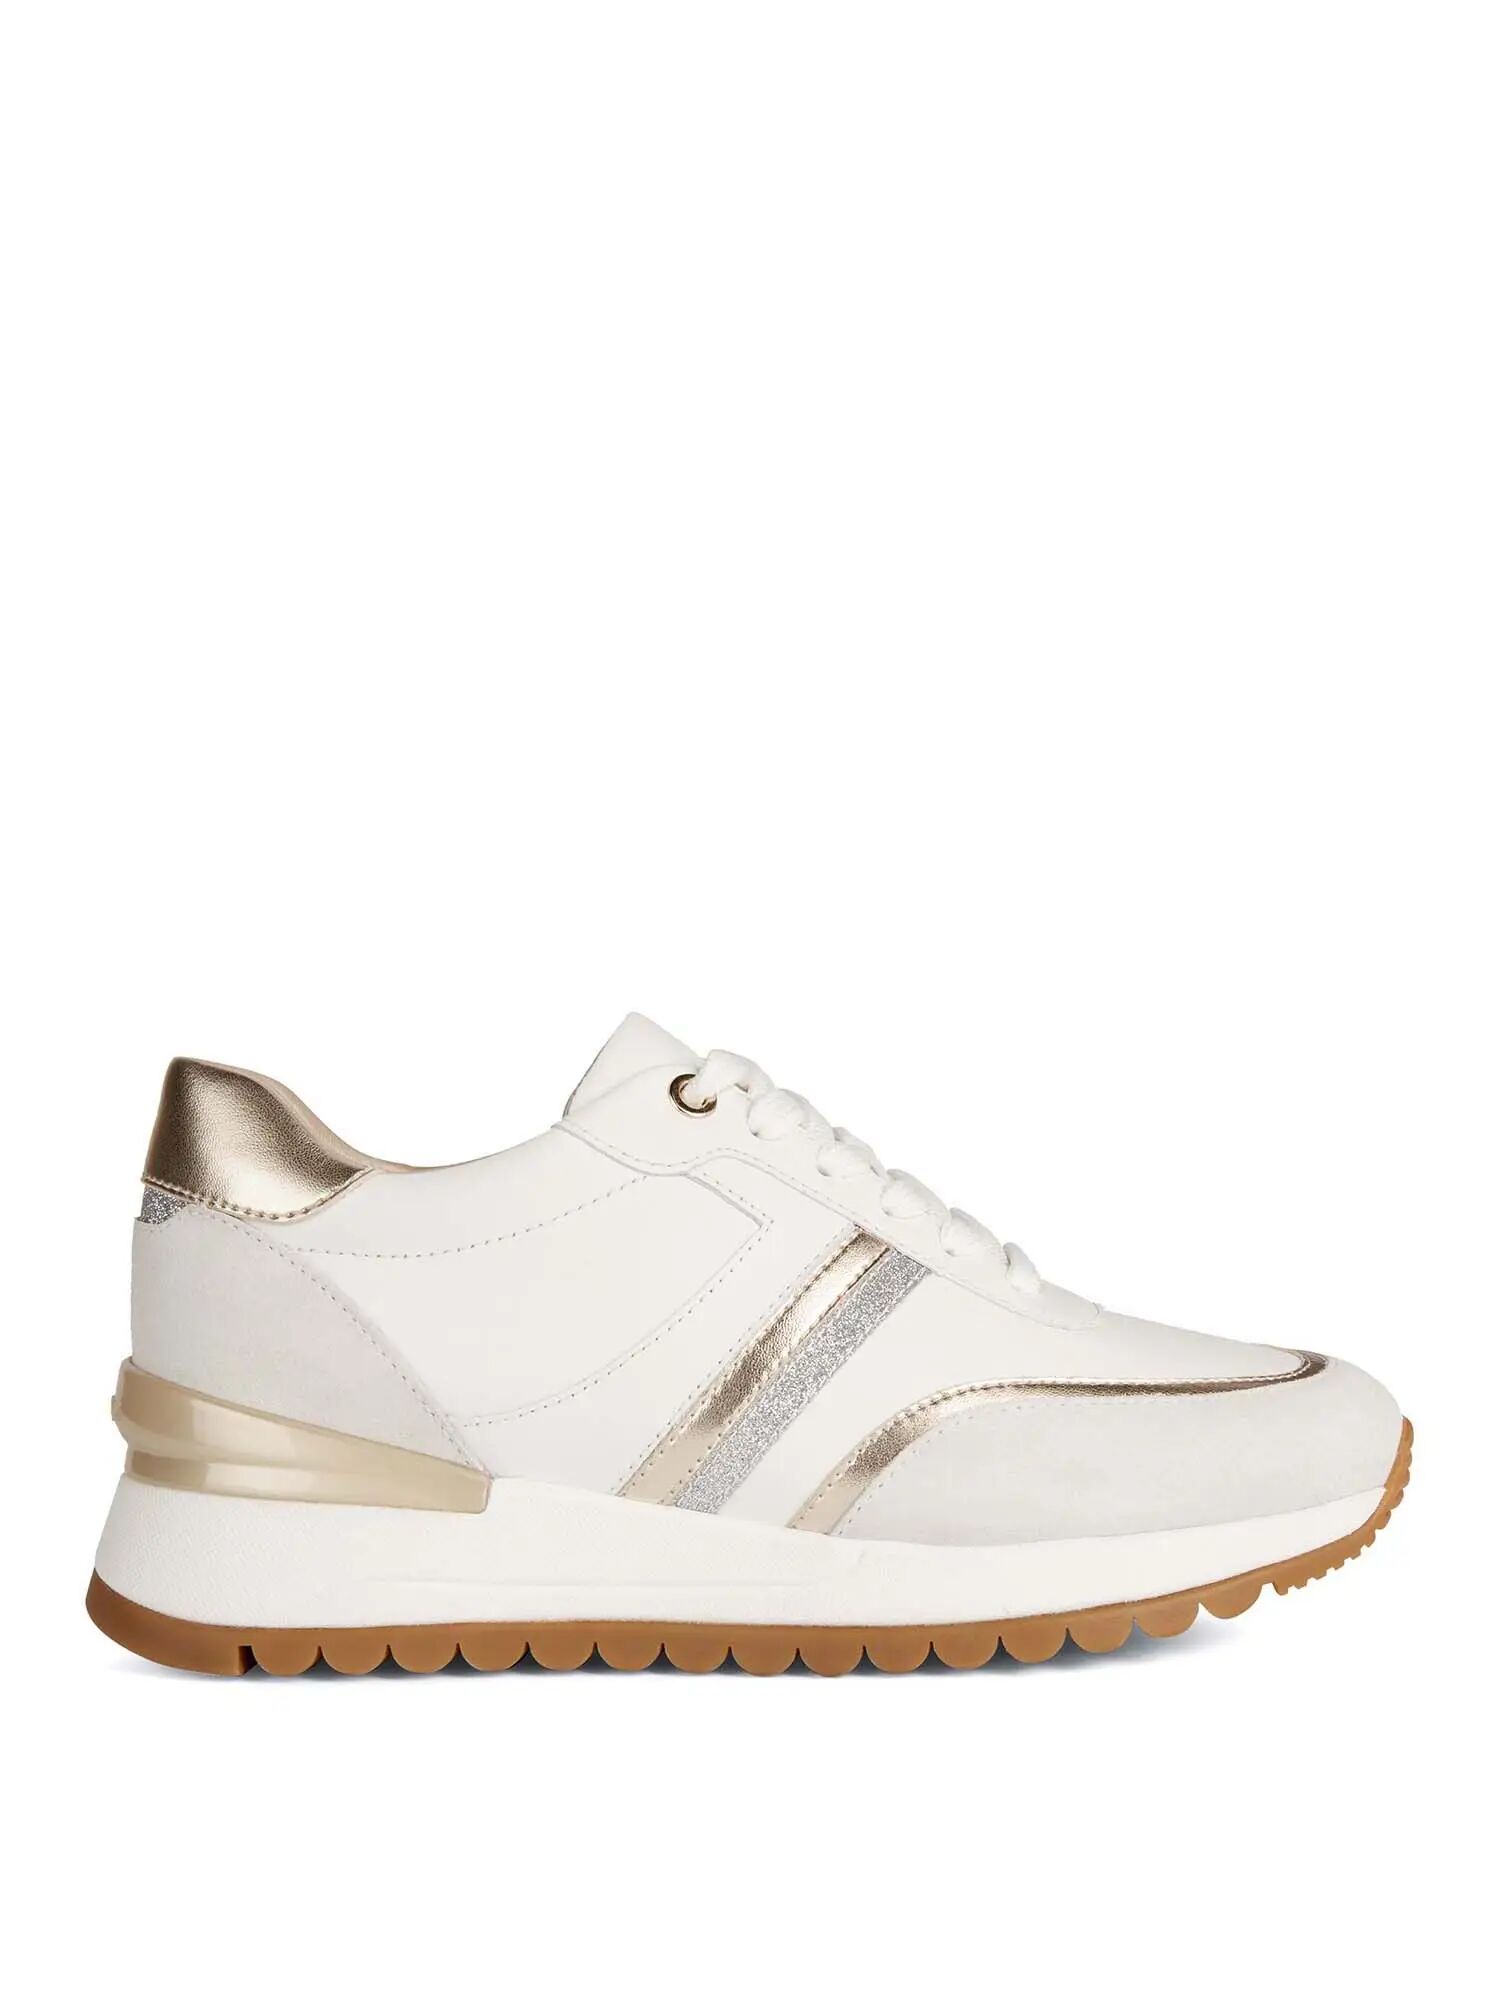 Geox Sneakers Bianche Donna BIANCO 35